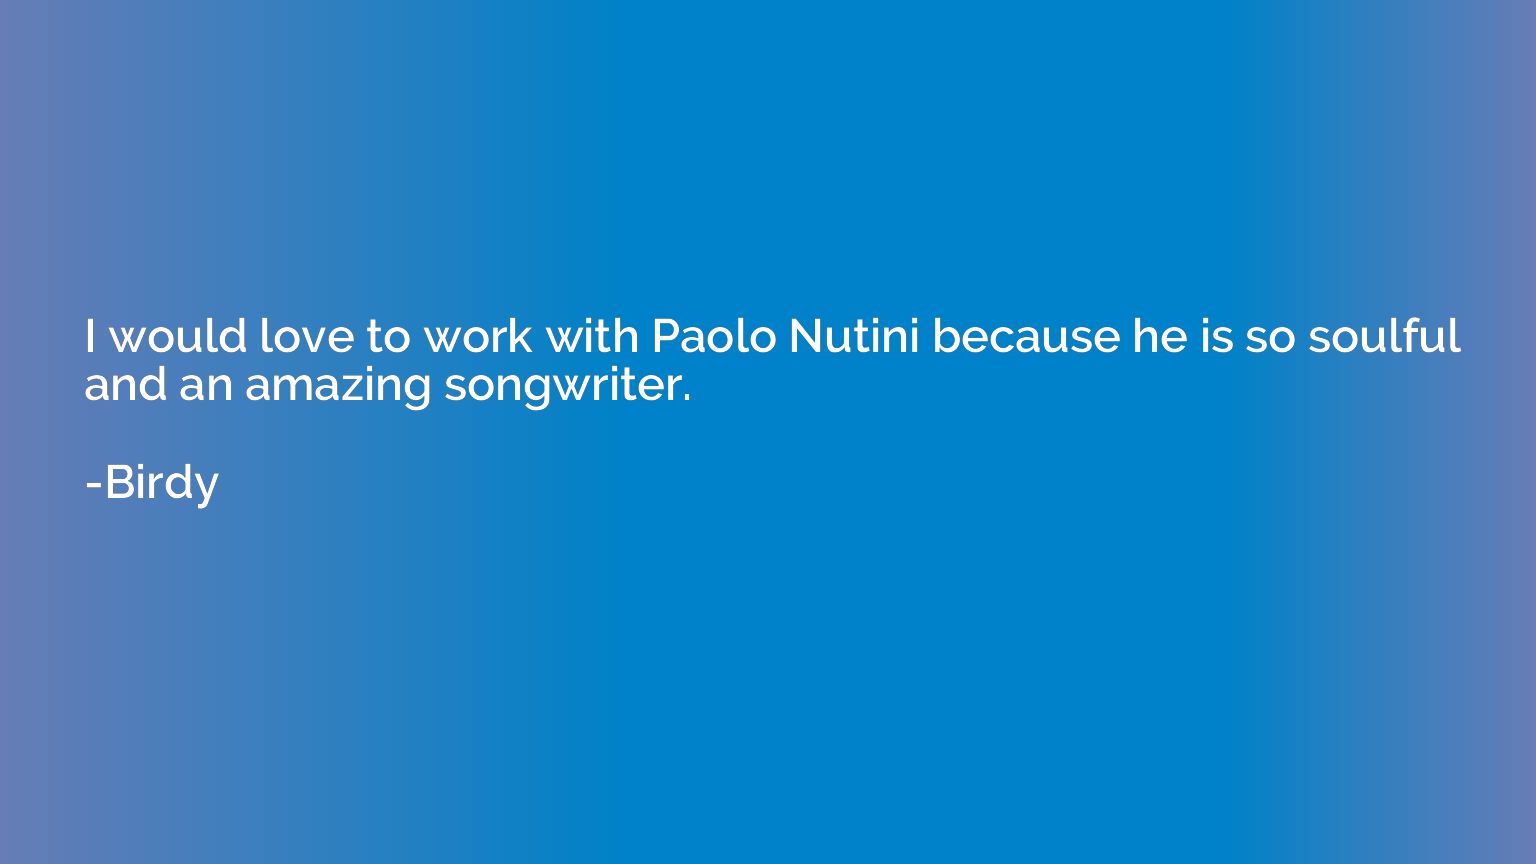 I would love to work with Paolo Nutini because he is so soul